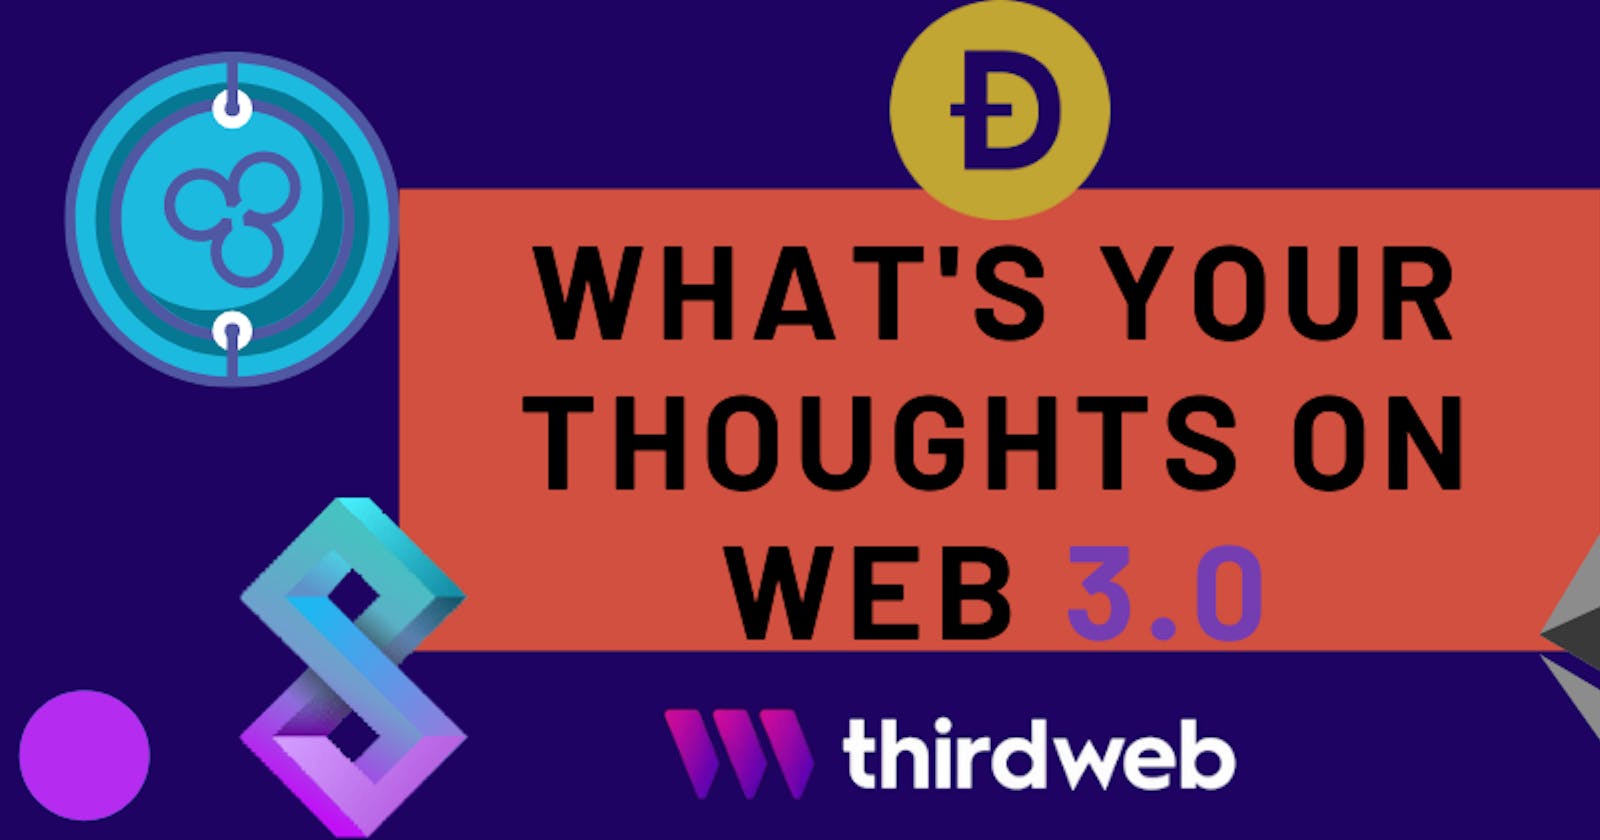 What's your thought on Web 3.0?